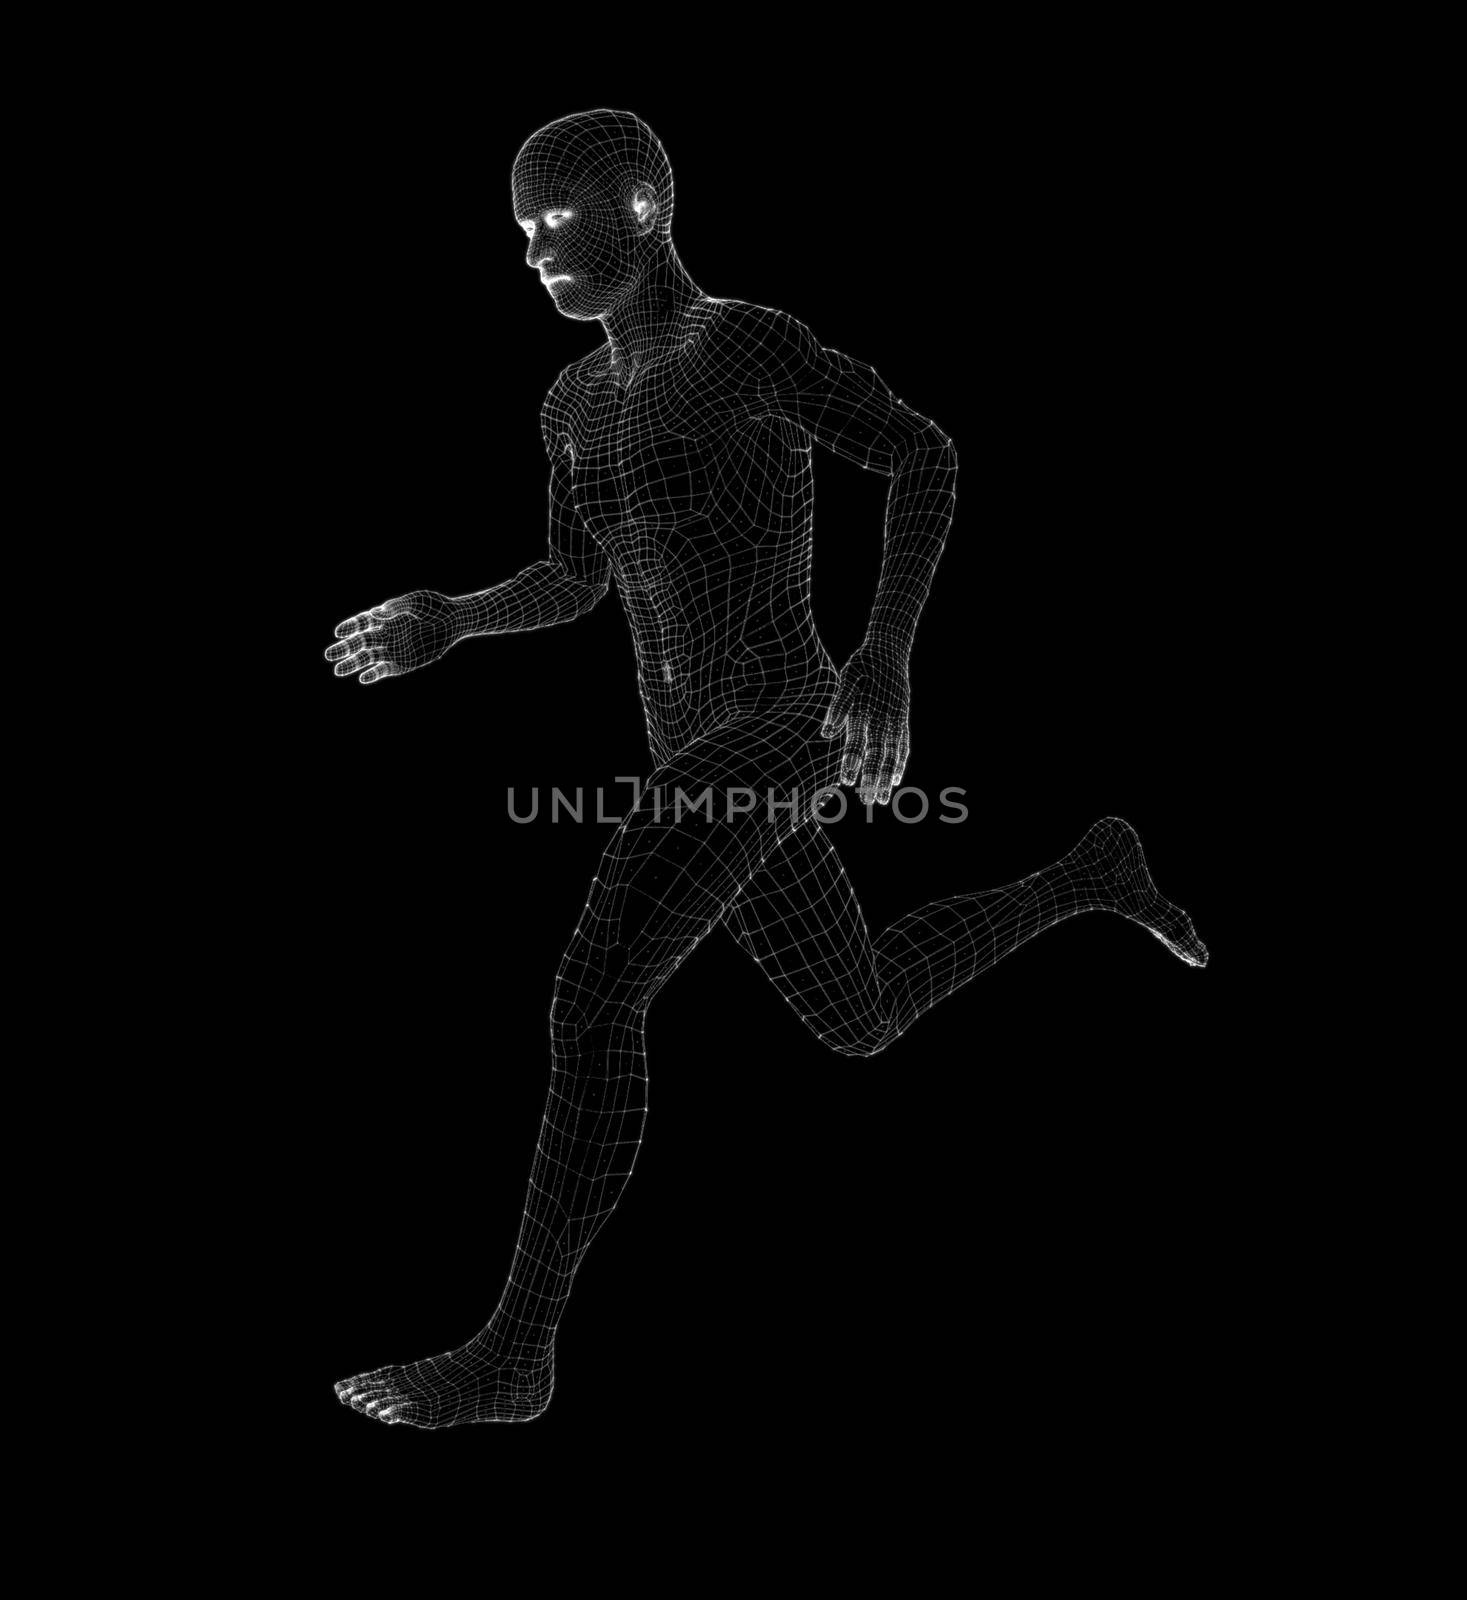 Hologram Human running. Medical and Technology Concept. Interface element. 3d illustration